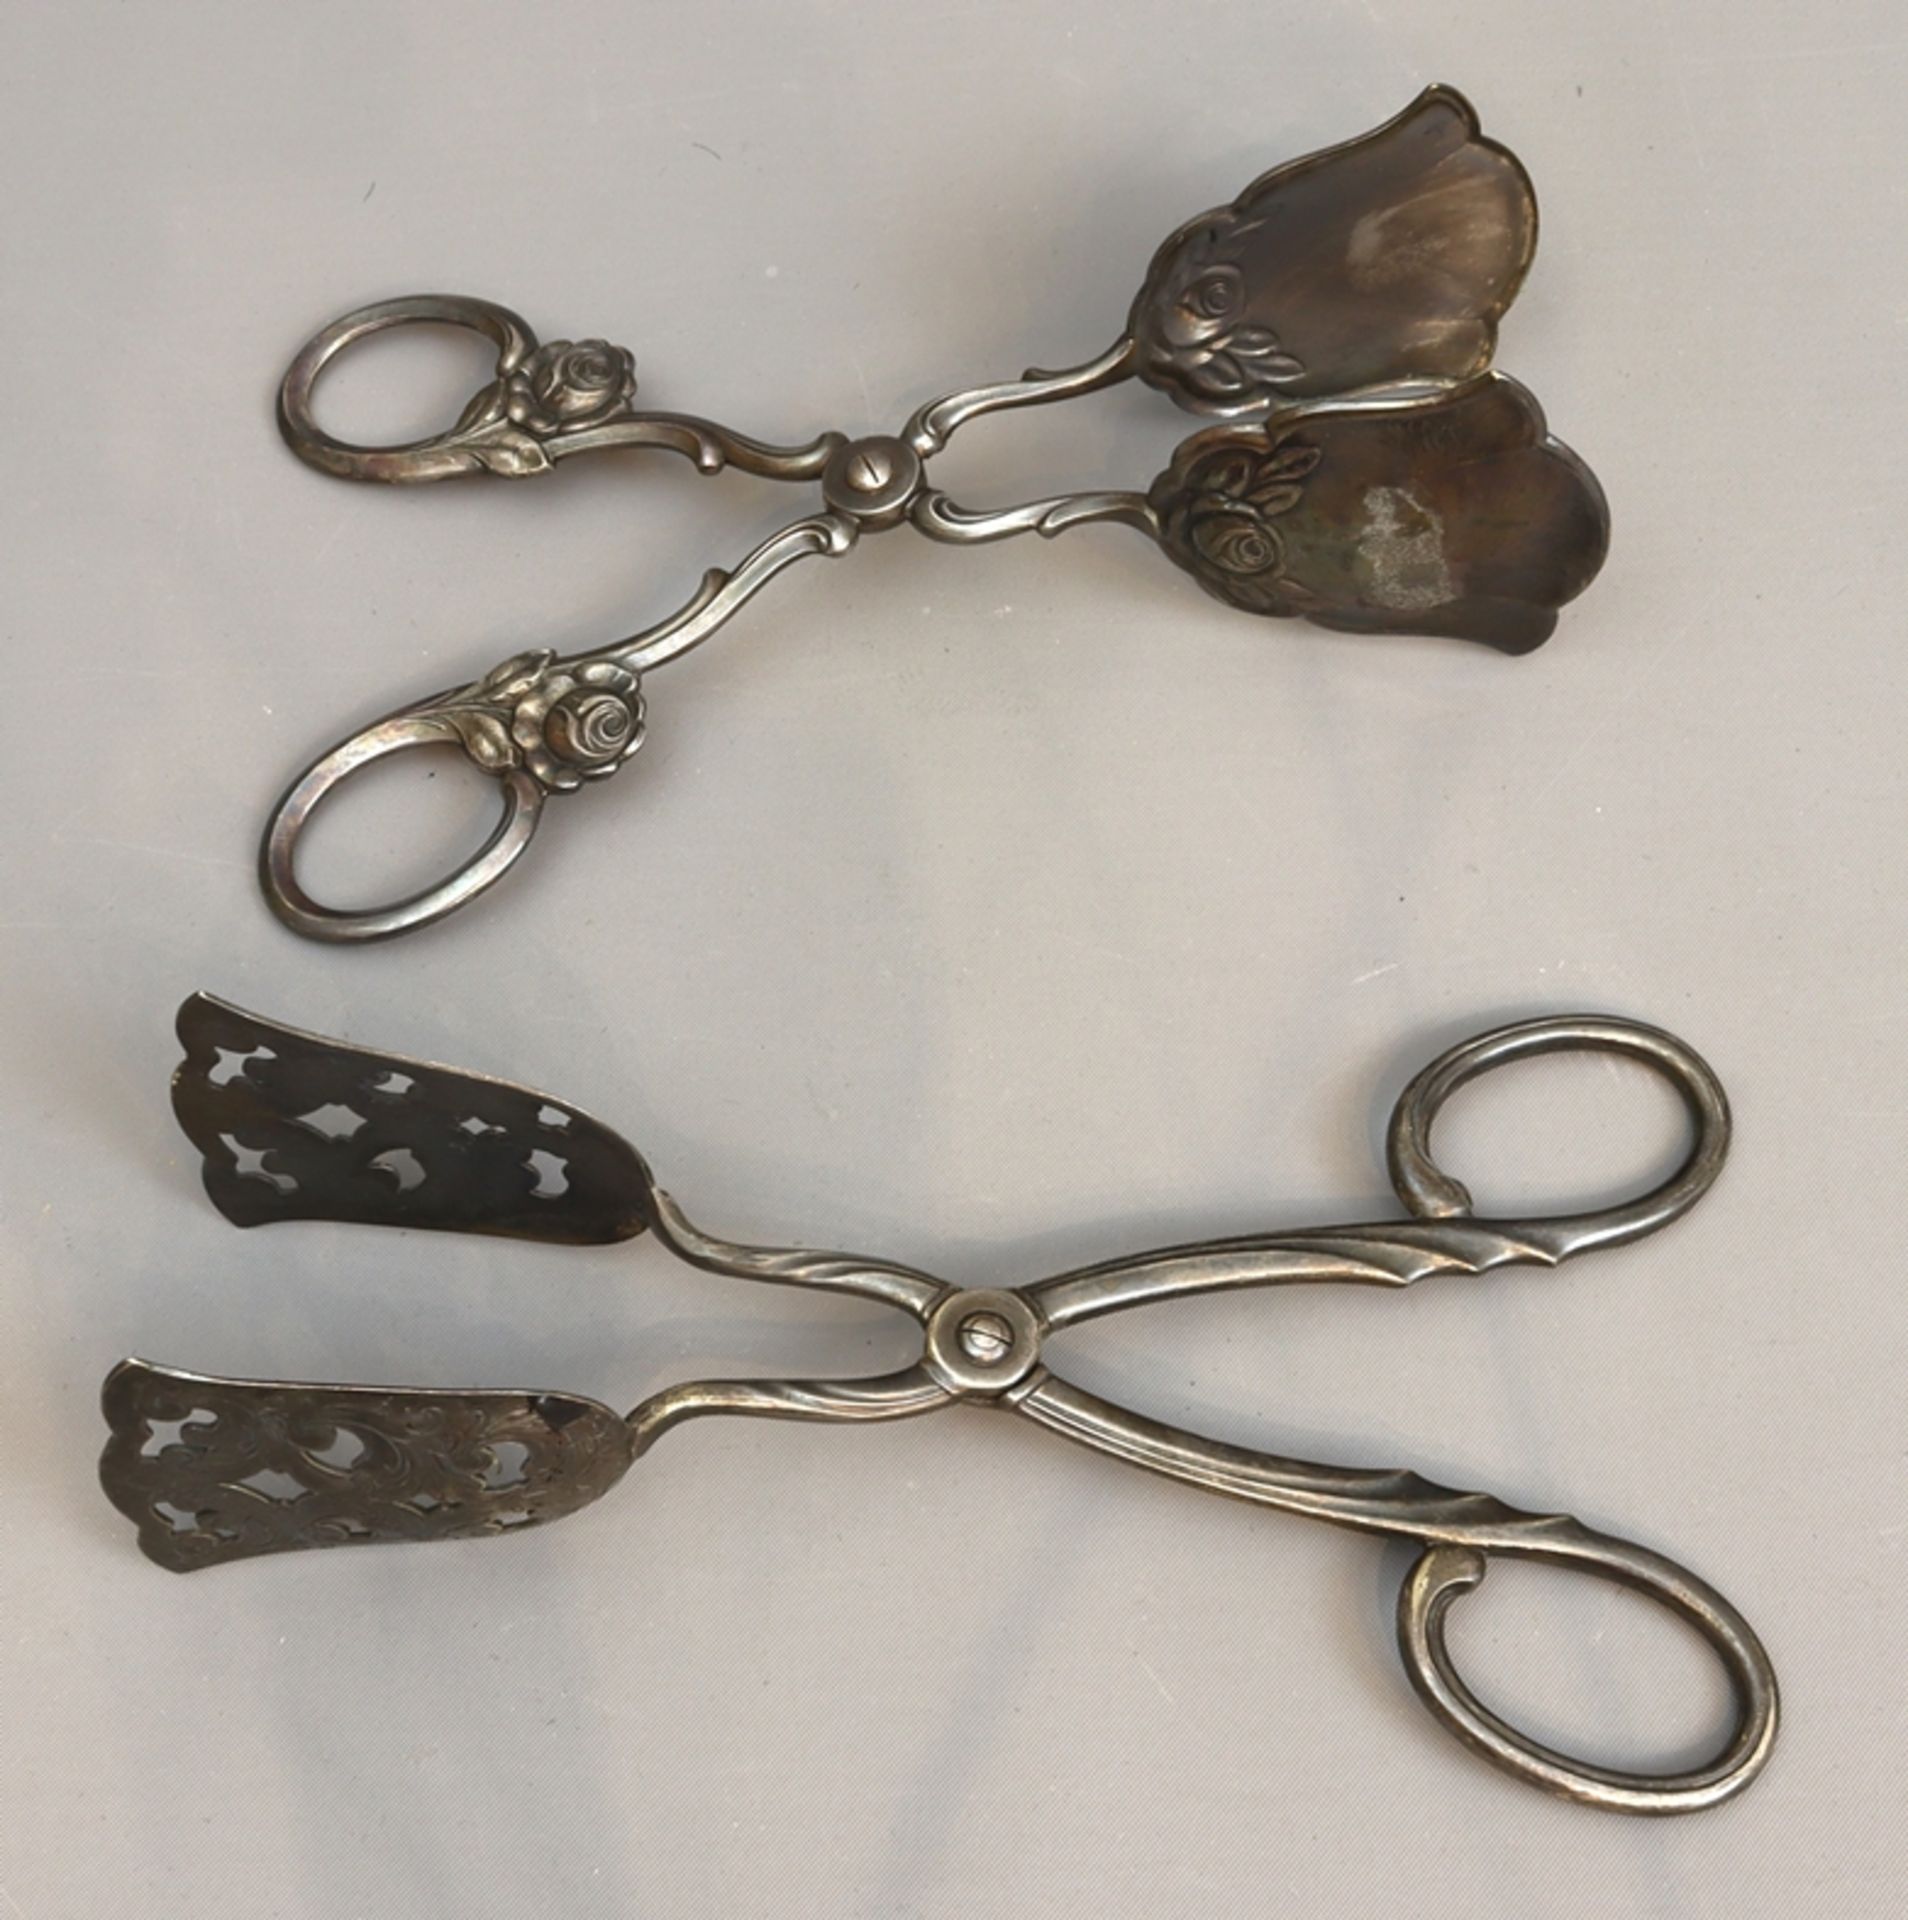 Lot of 4 pastry tongs of different types, early 20th c., German - Image 3 of 4